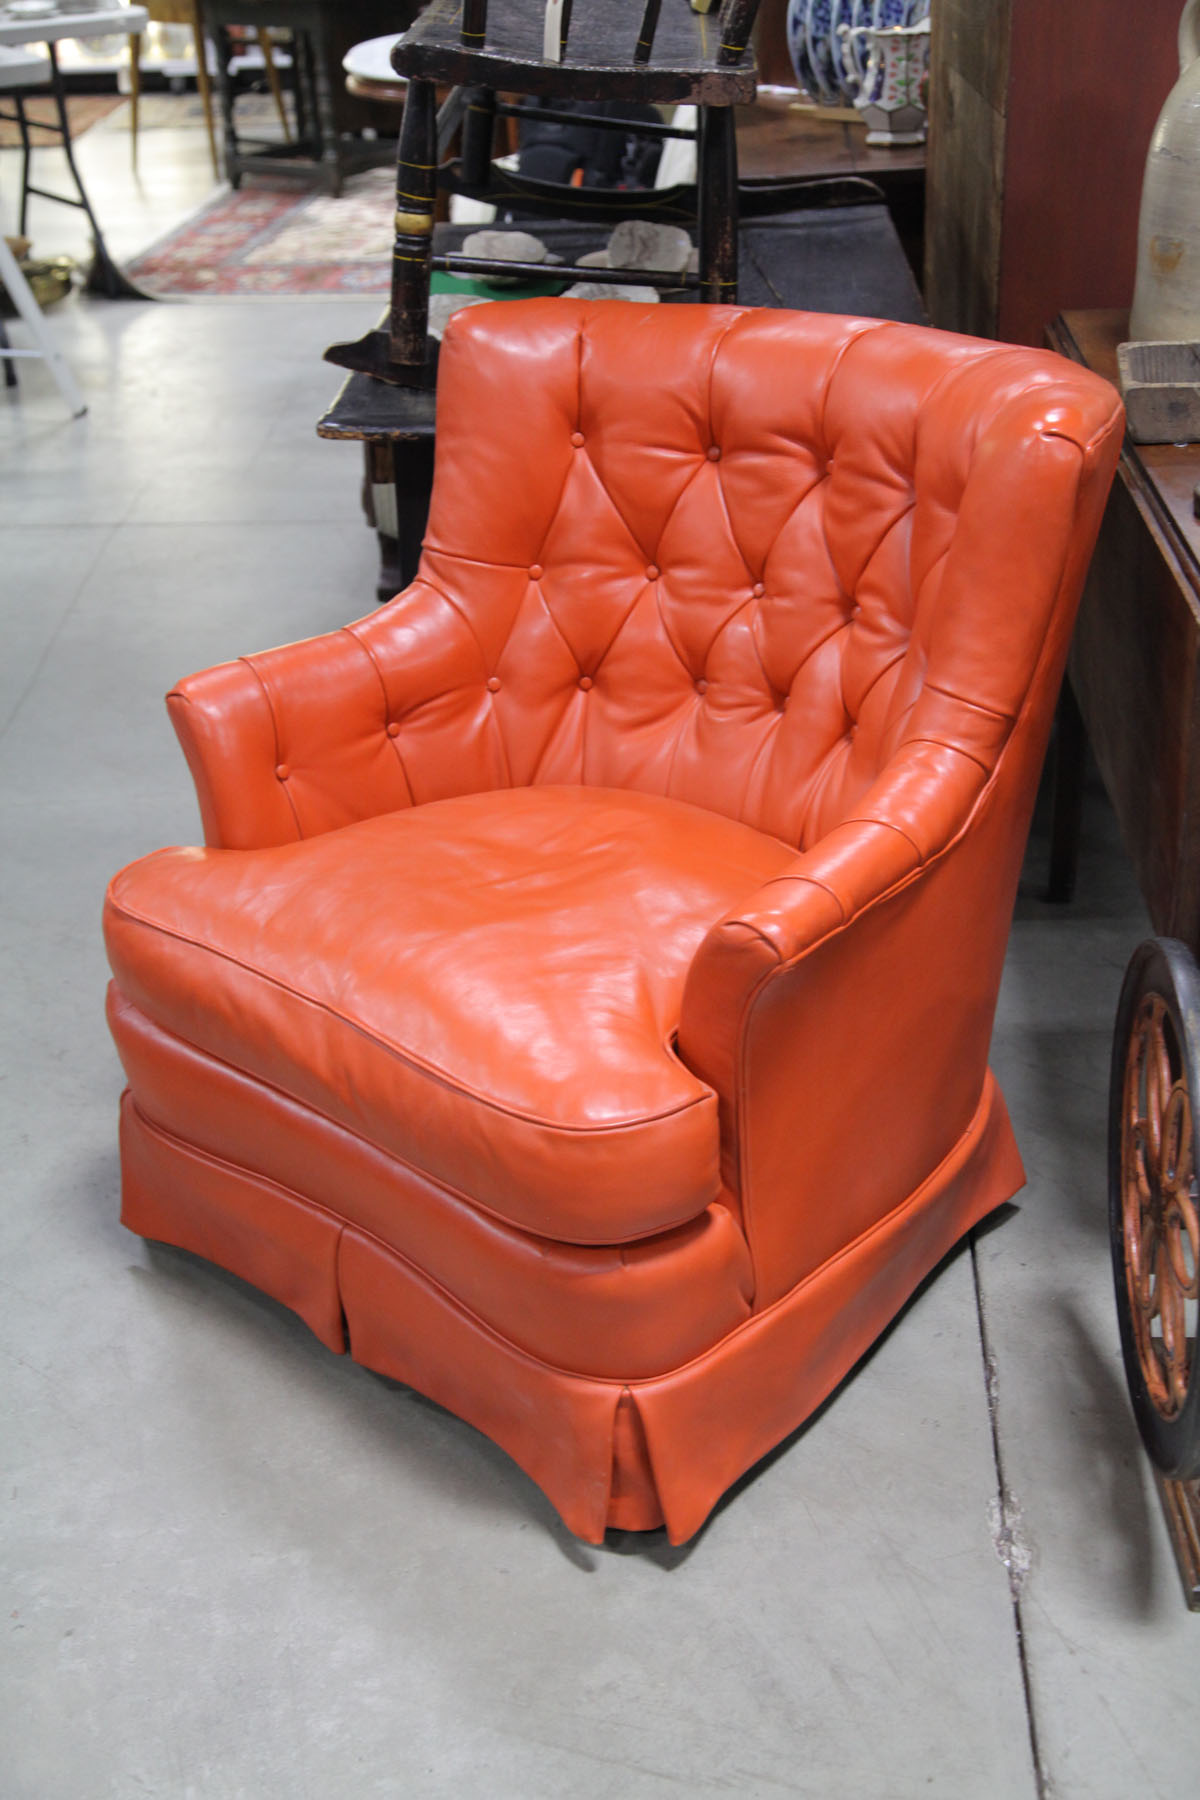 TOMLINSON LEATHER CHAIR American 10c23e